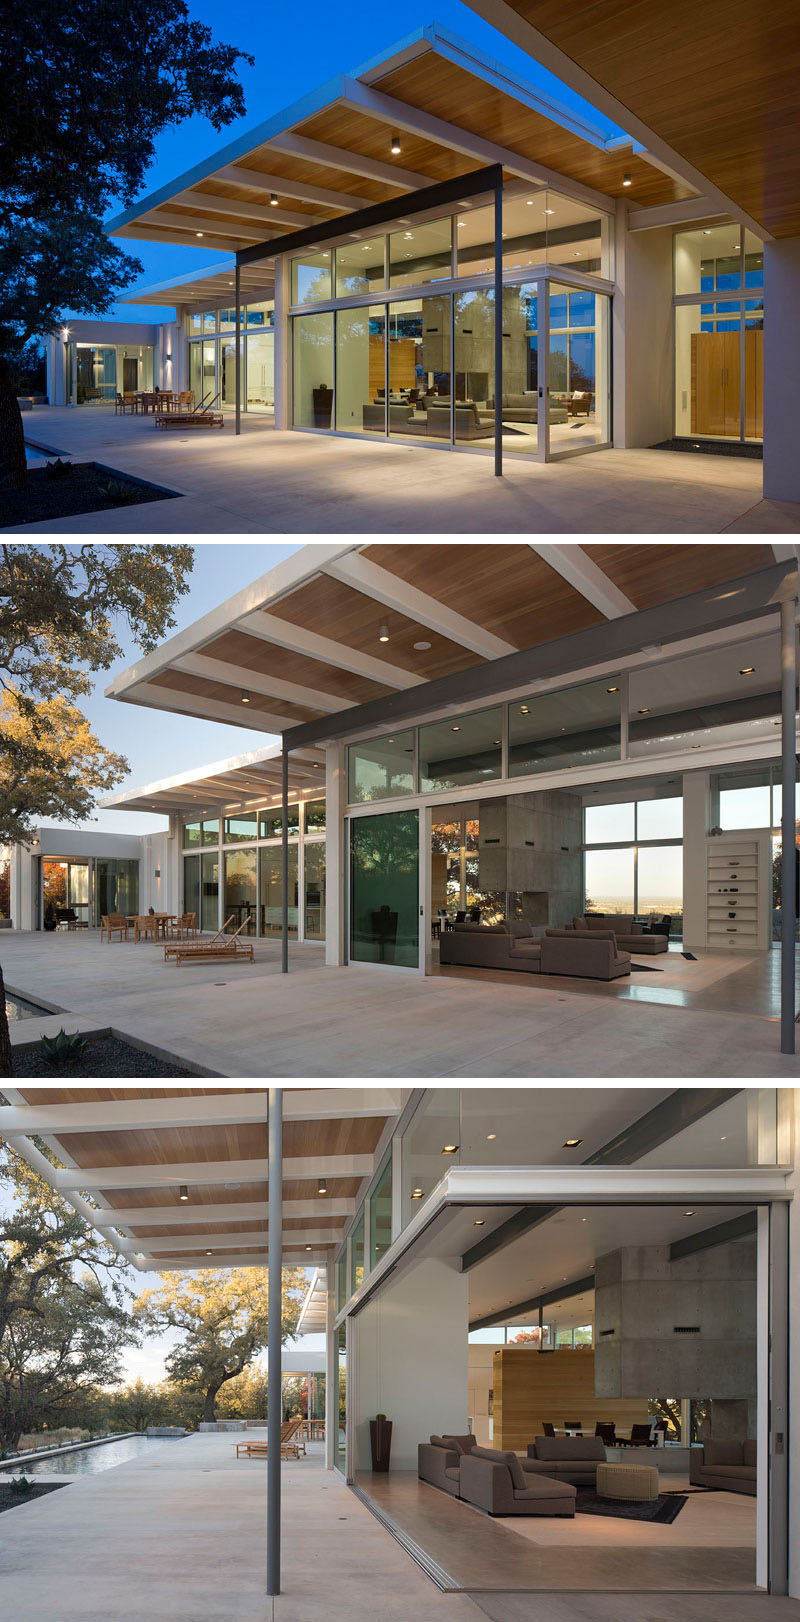 This modern house features sliding glass doors that open up completely to create an indoor/outdoor living experience. 